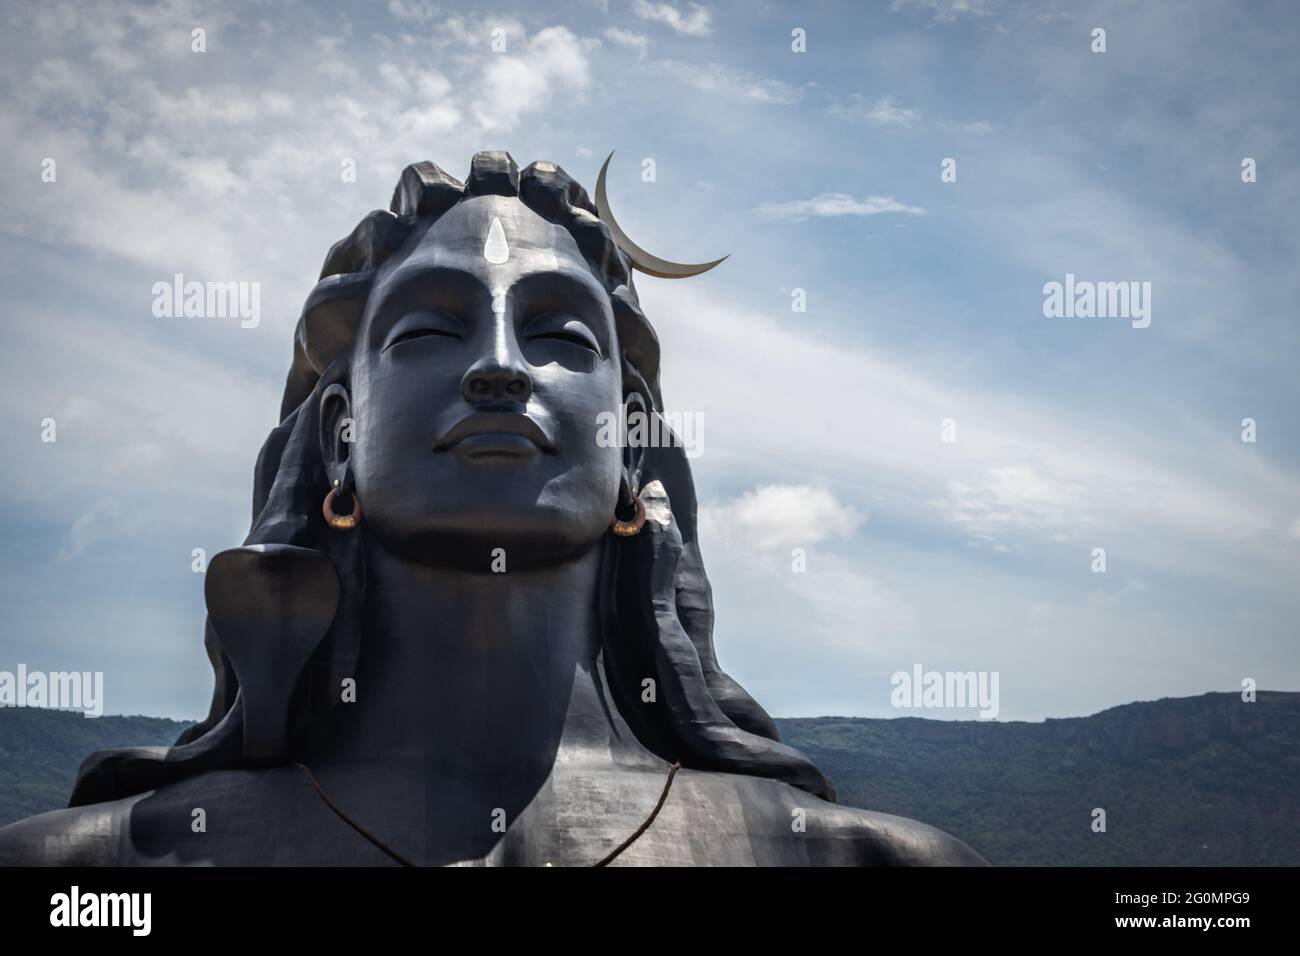 adiyogi lord shiva statue from unique different angles image is ...